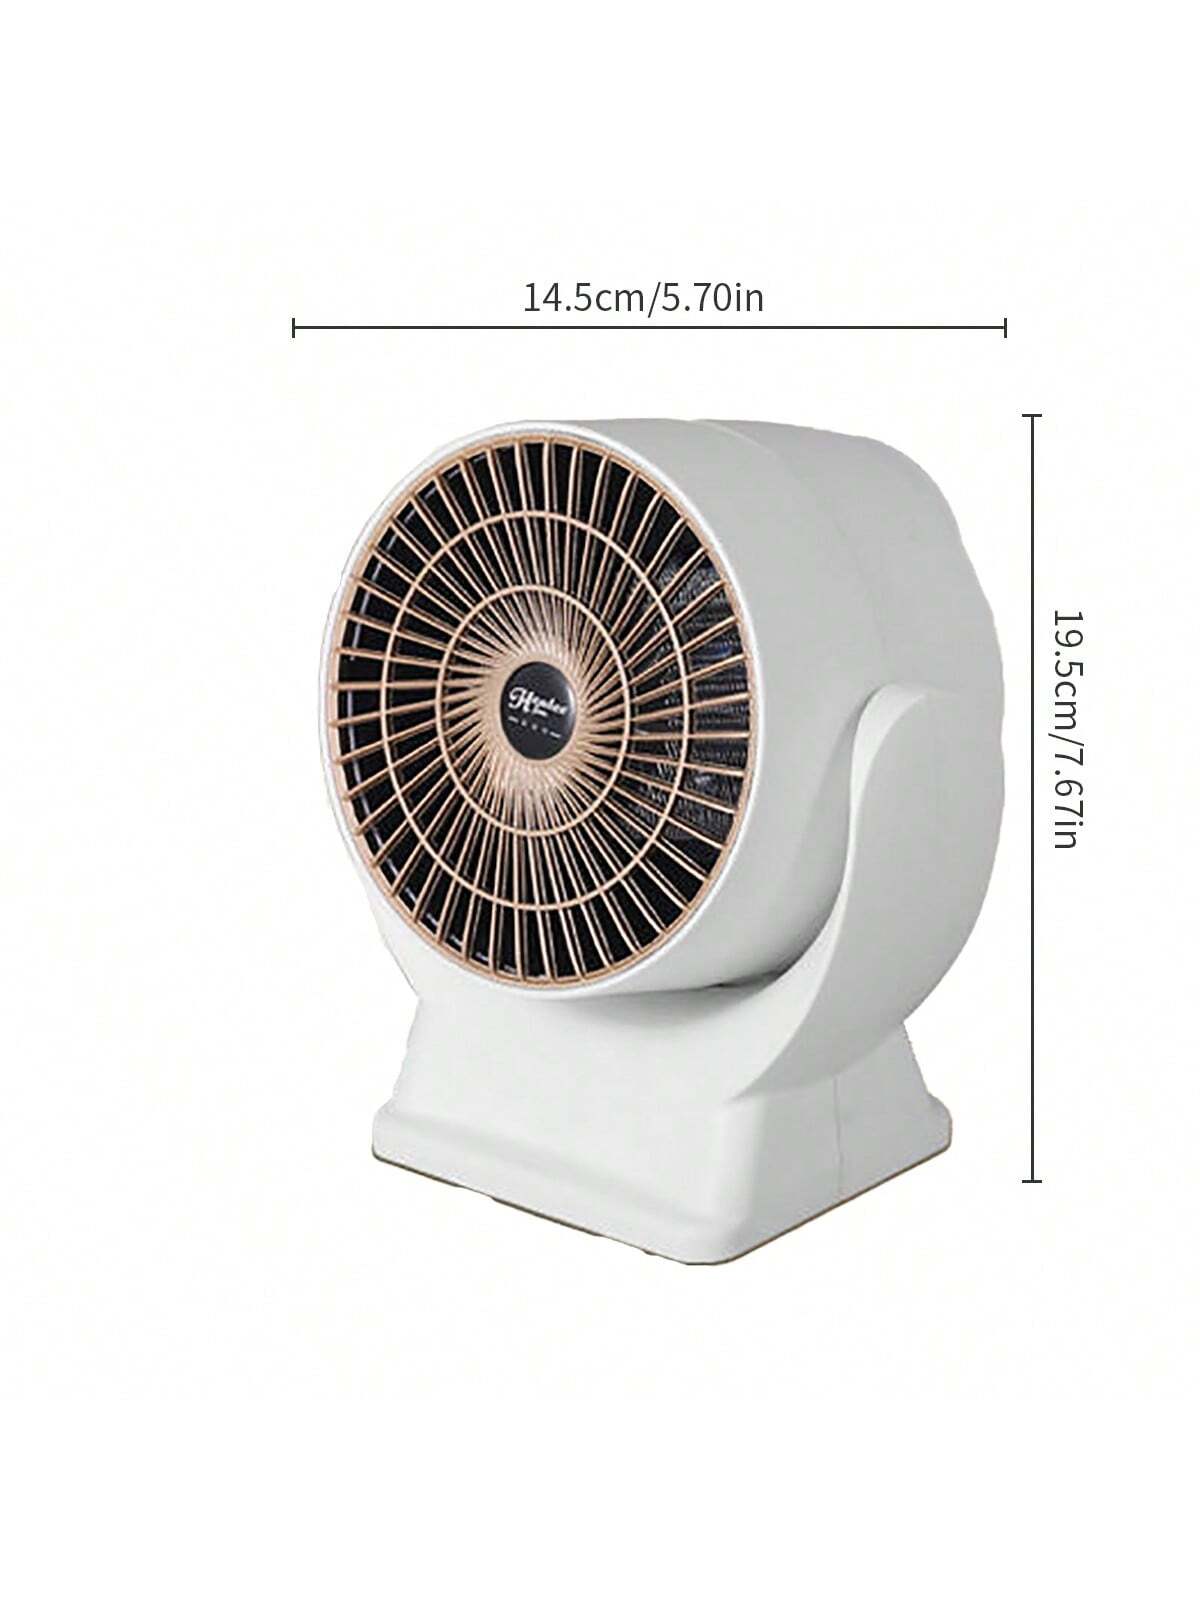 Mini heater,personal heater fan,Fast Heating Ceramic Room Small Heater with Heating and Fan Modes for Bedroom, Office and Indoor Use-White-9